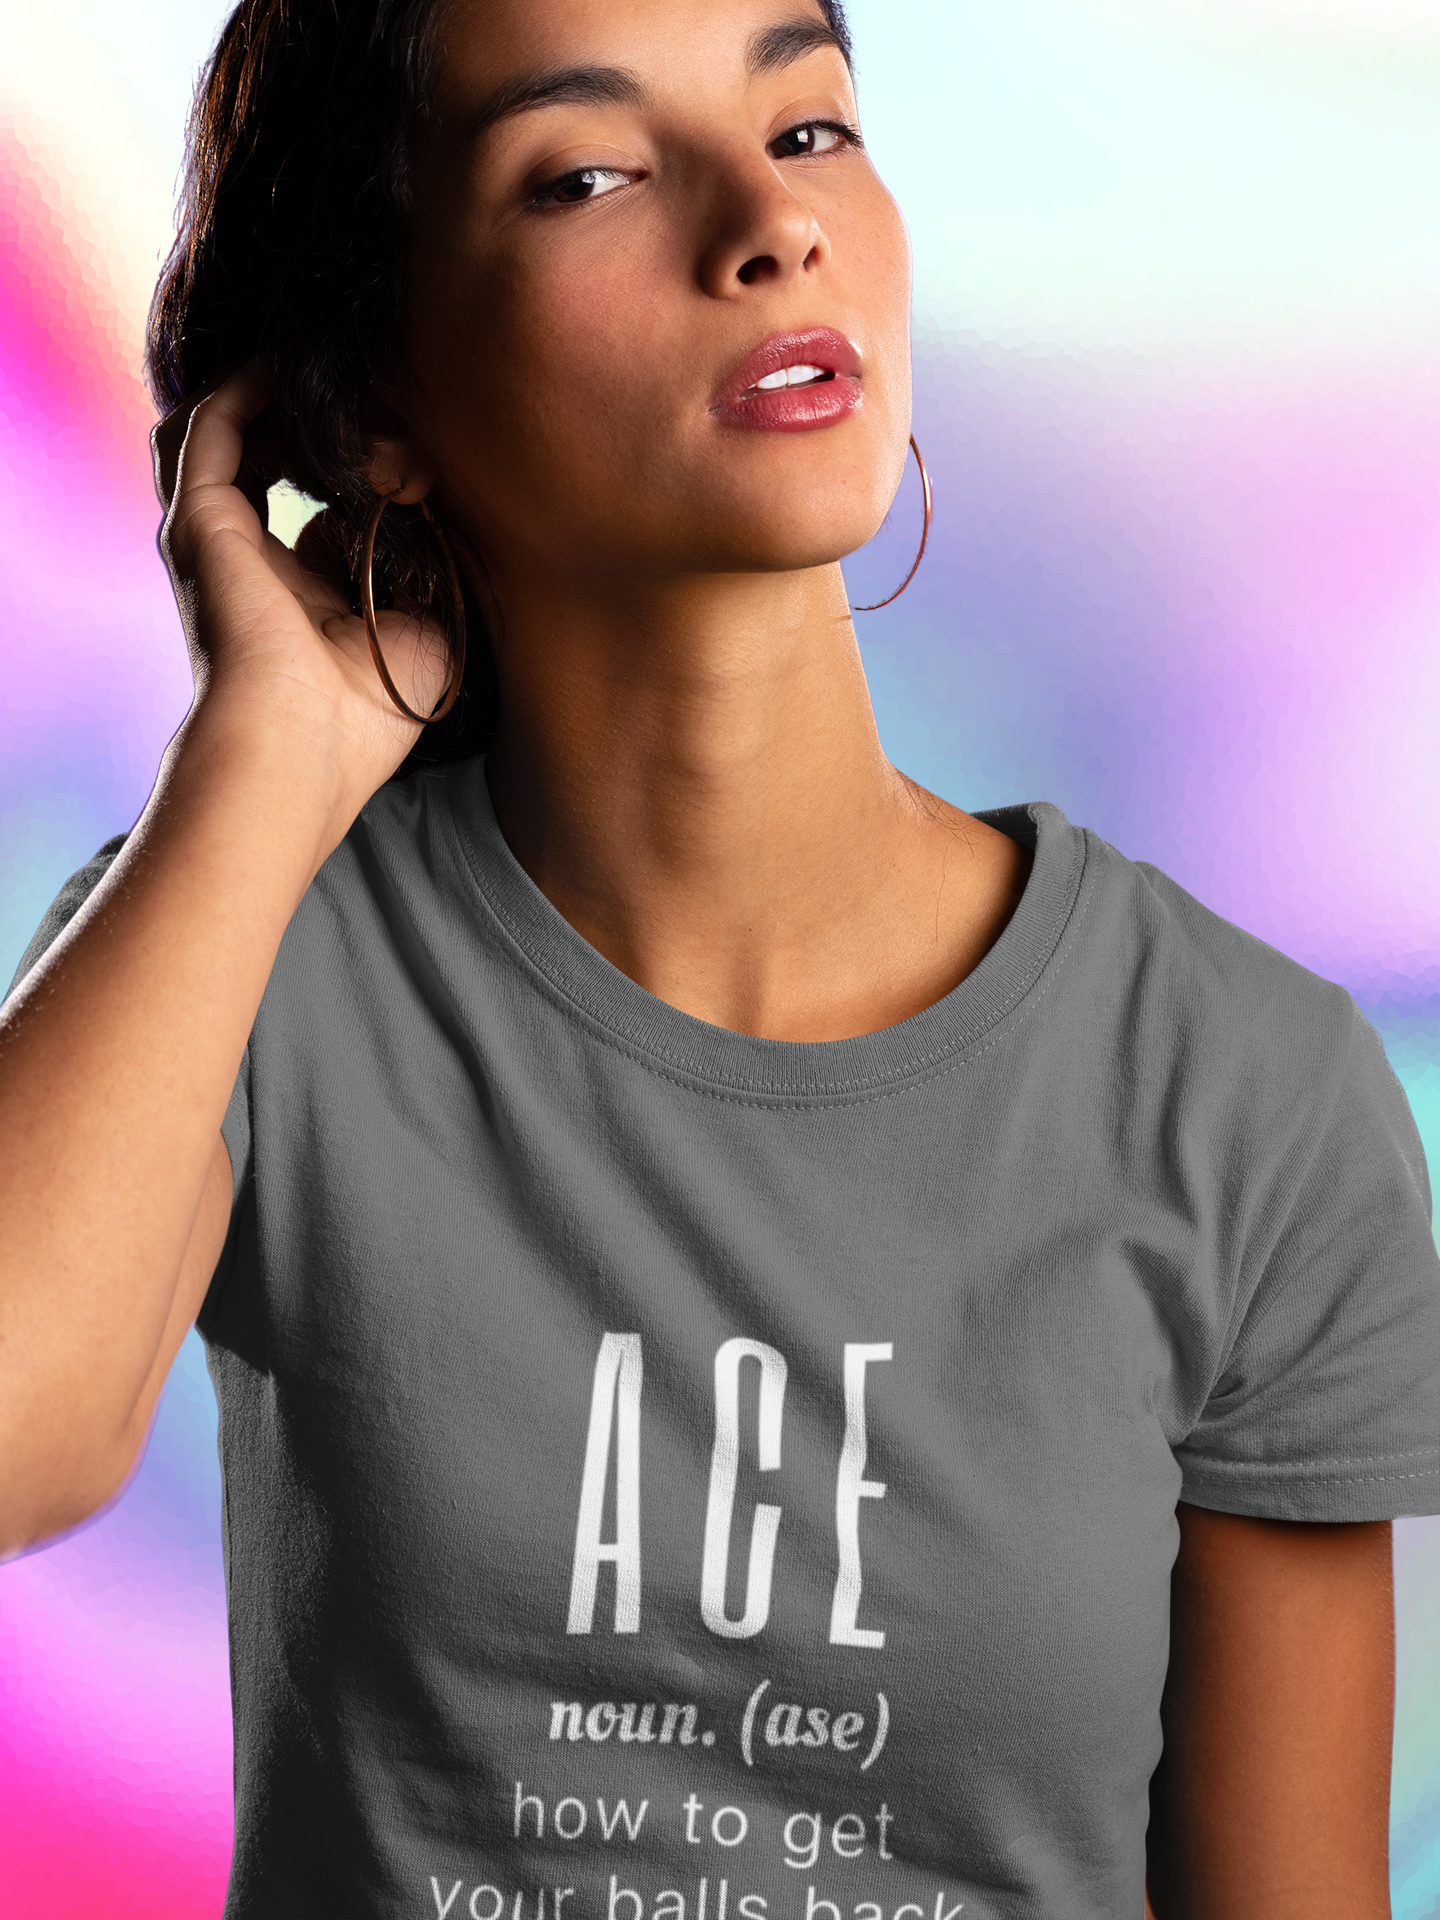 The ACE volleyball definition featuring hilarious slang volleyball t shirt quotes are on Etsy and Amazon.